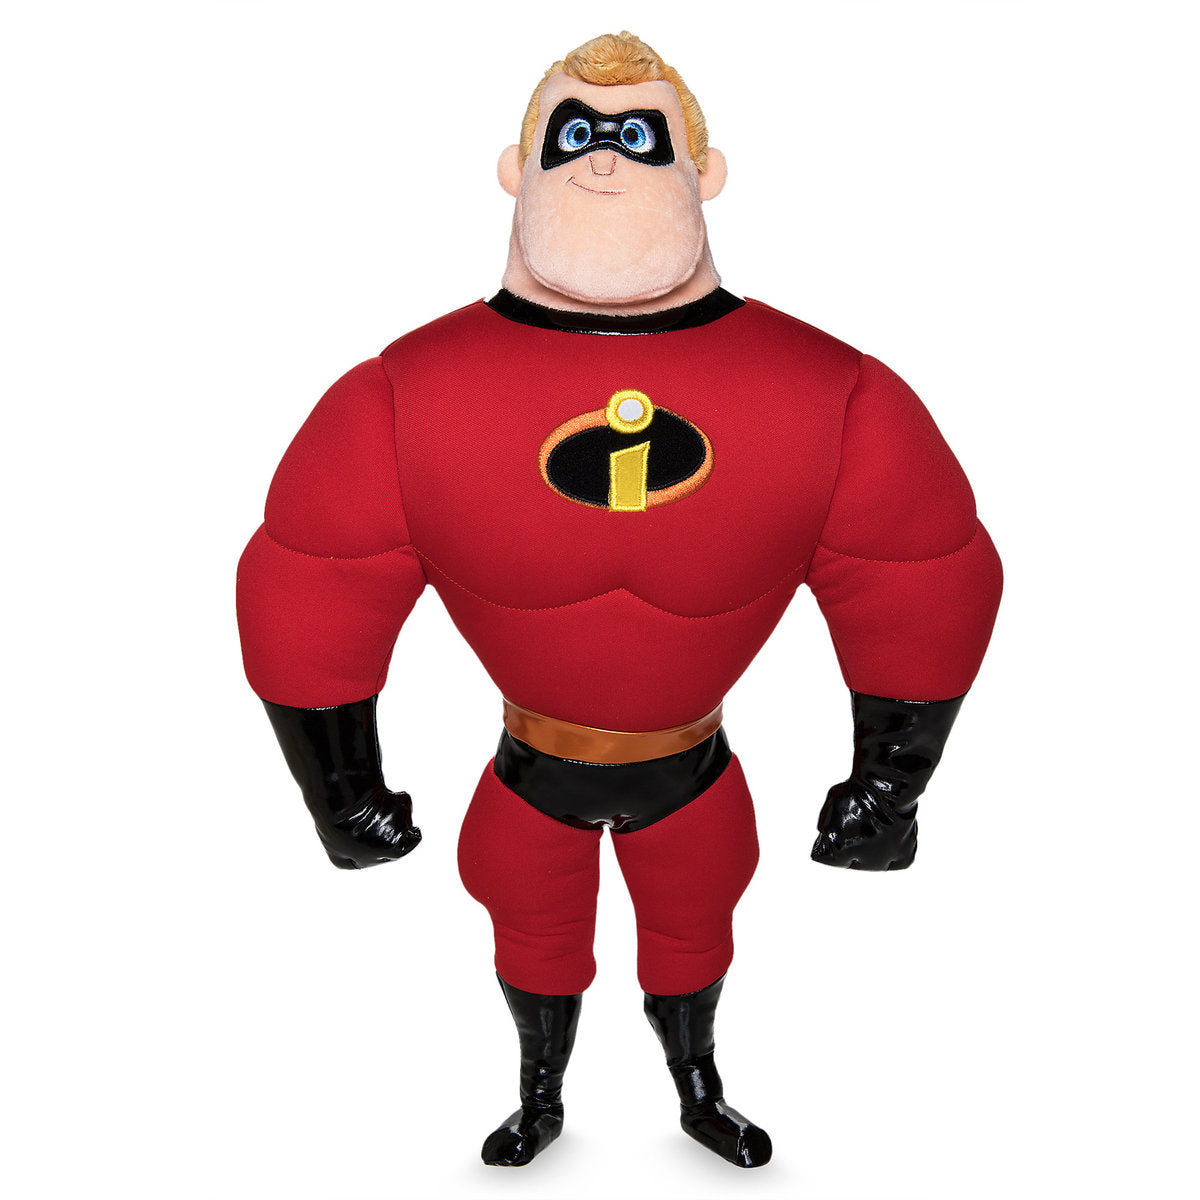 Disney Store Mr. Incredible Plush Incredibles 2 Medium New With Tags